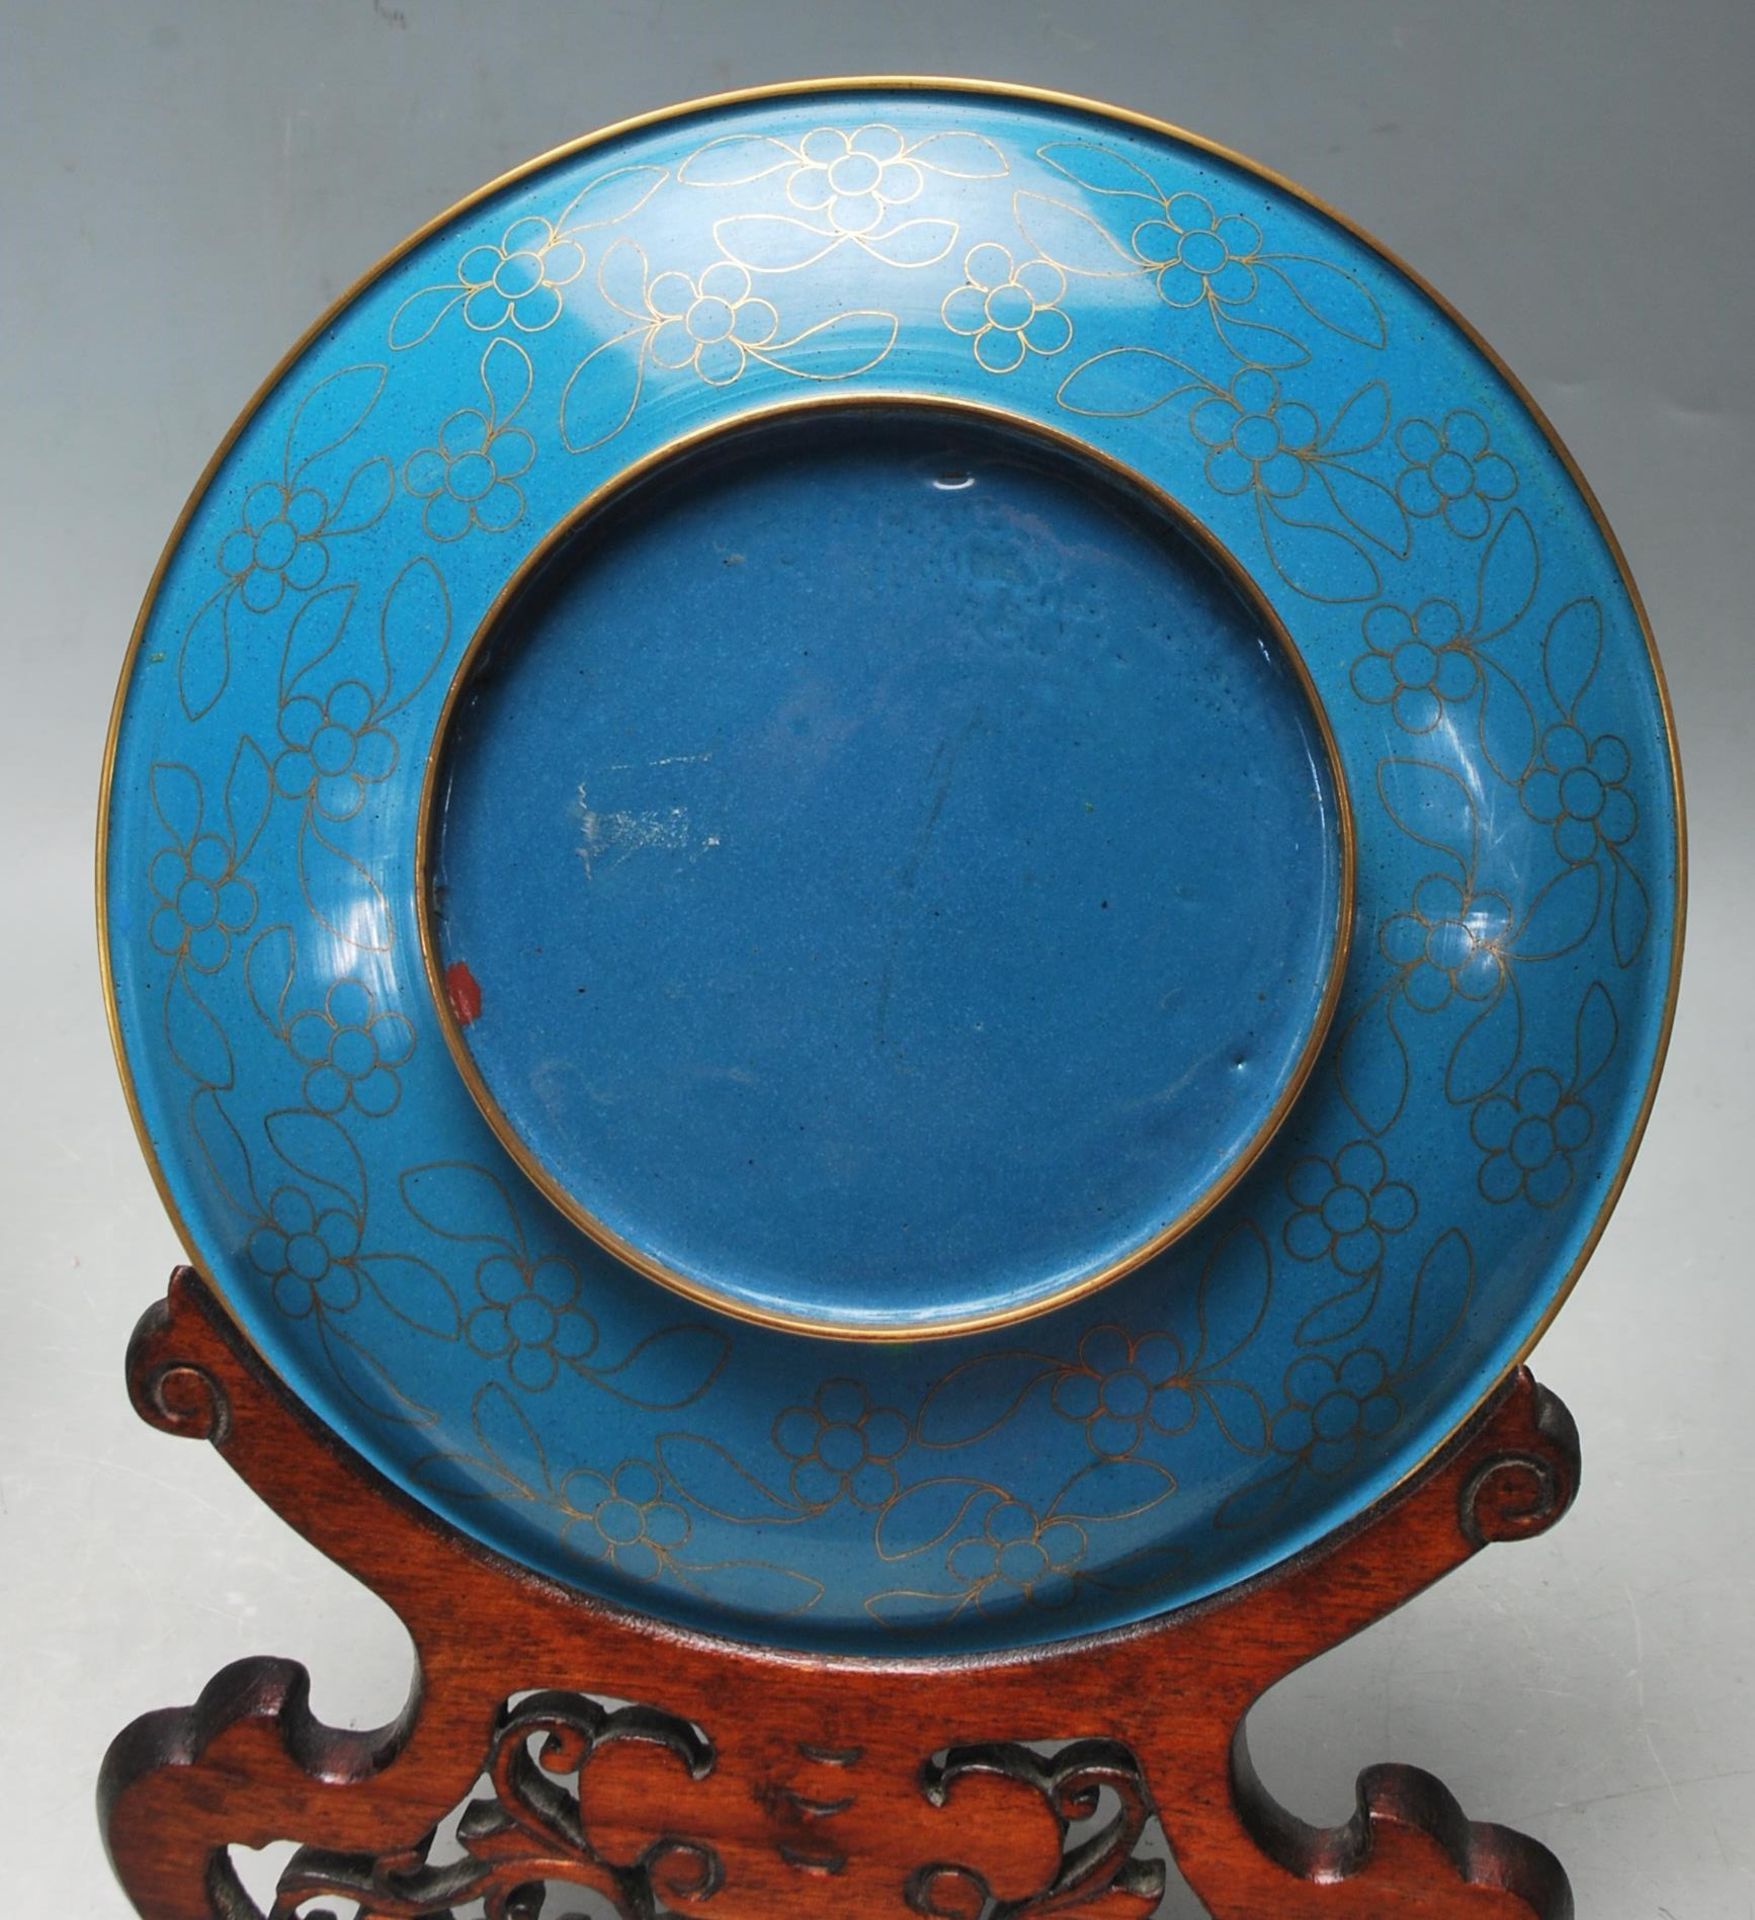 COLLECTION OF LATE 20TH CENTURY CHINESE REPUBLIC BRASS CLOISONNE - Image 4 of 8